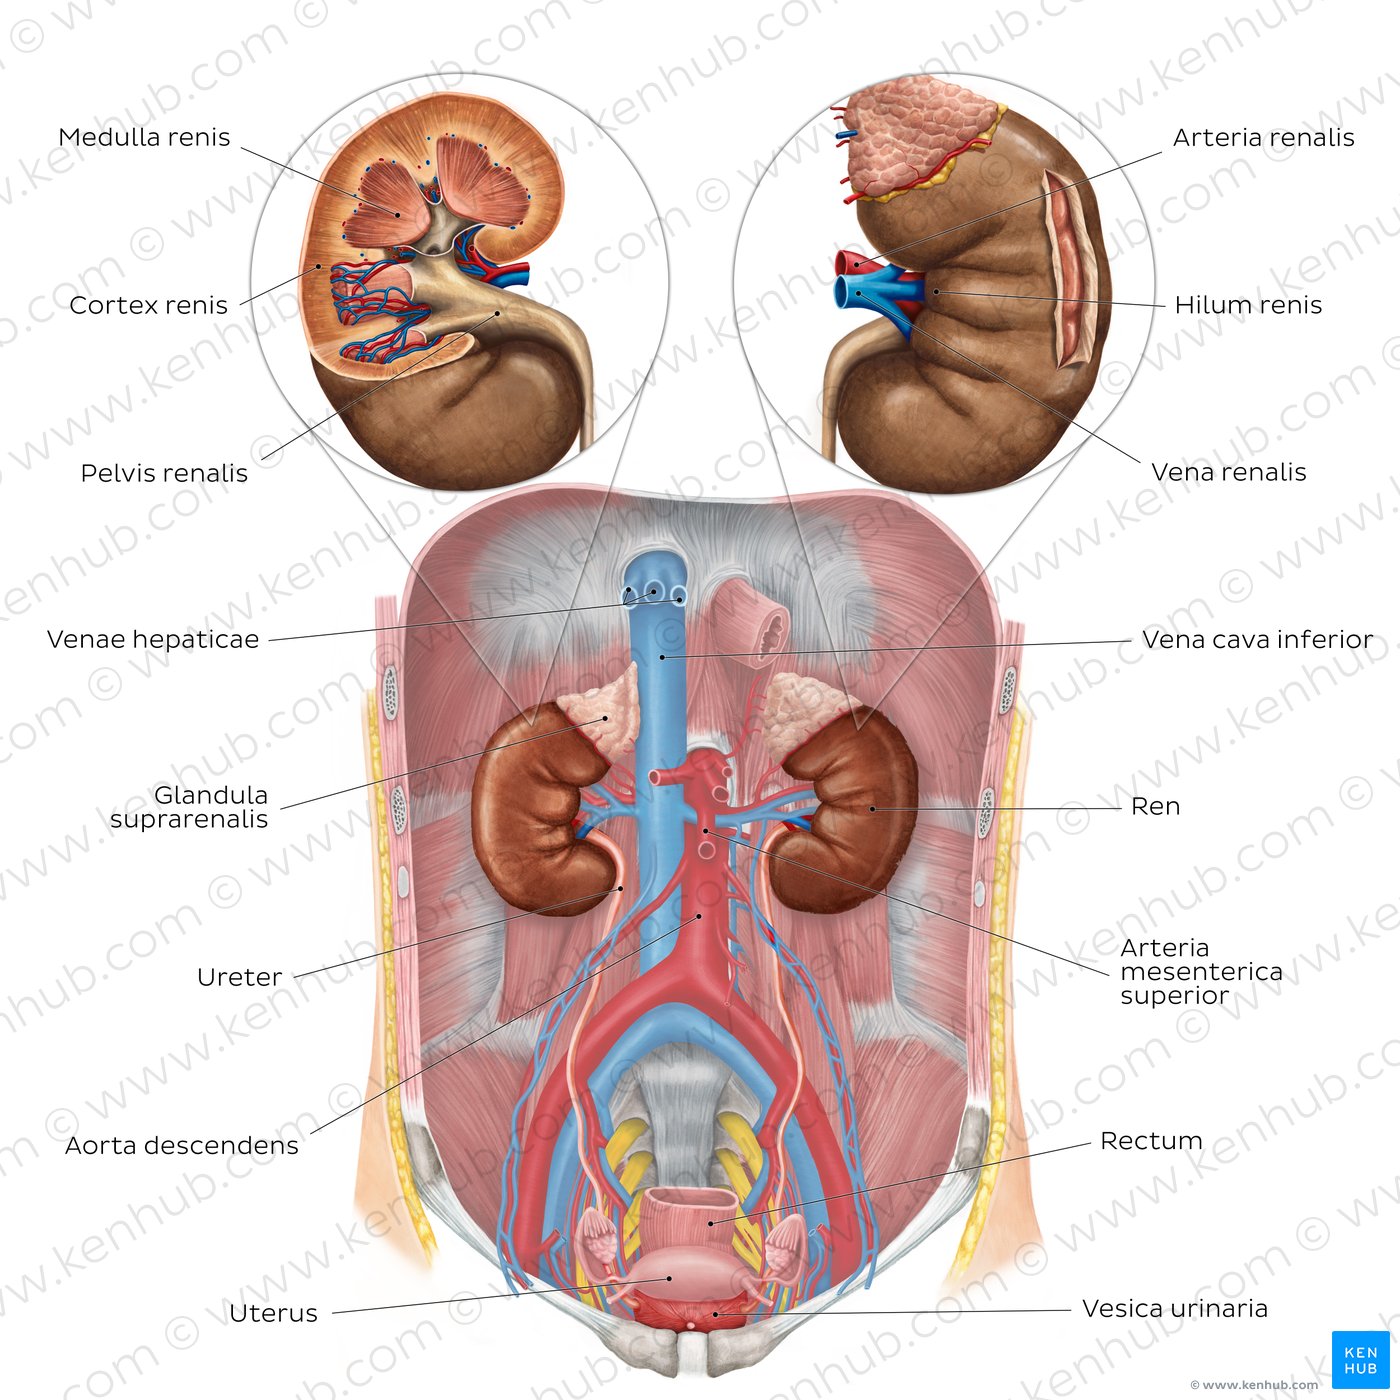 Urinary system - Overview